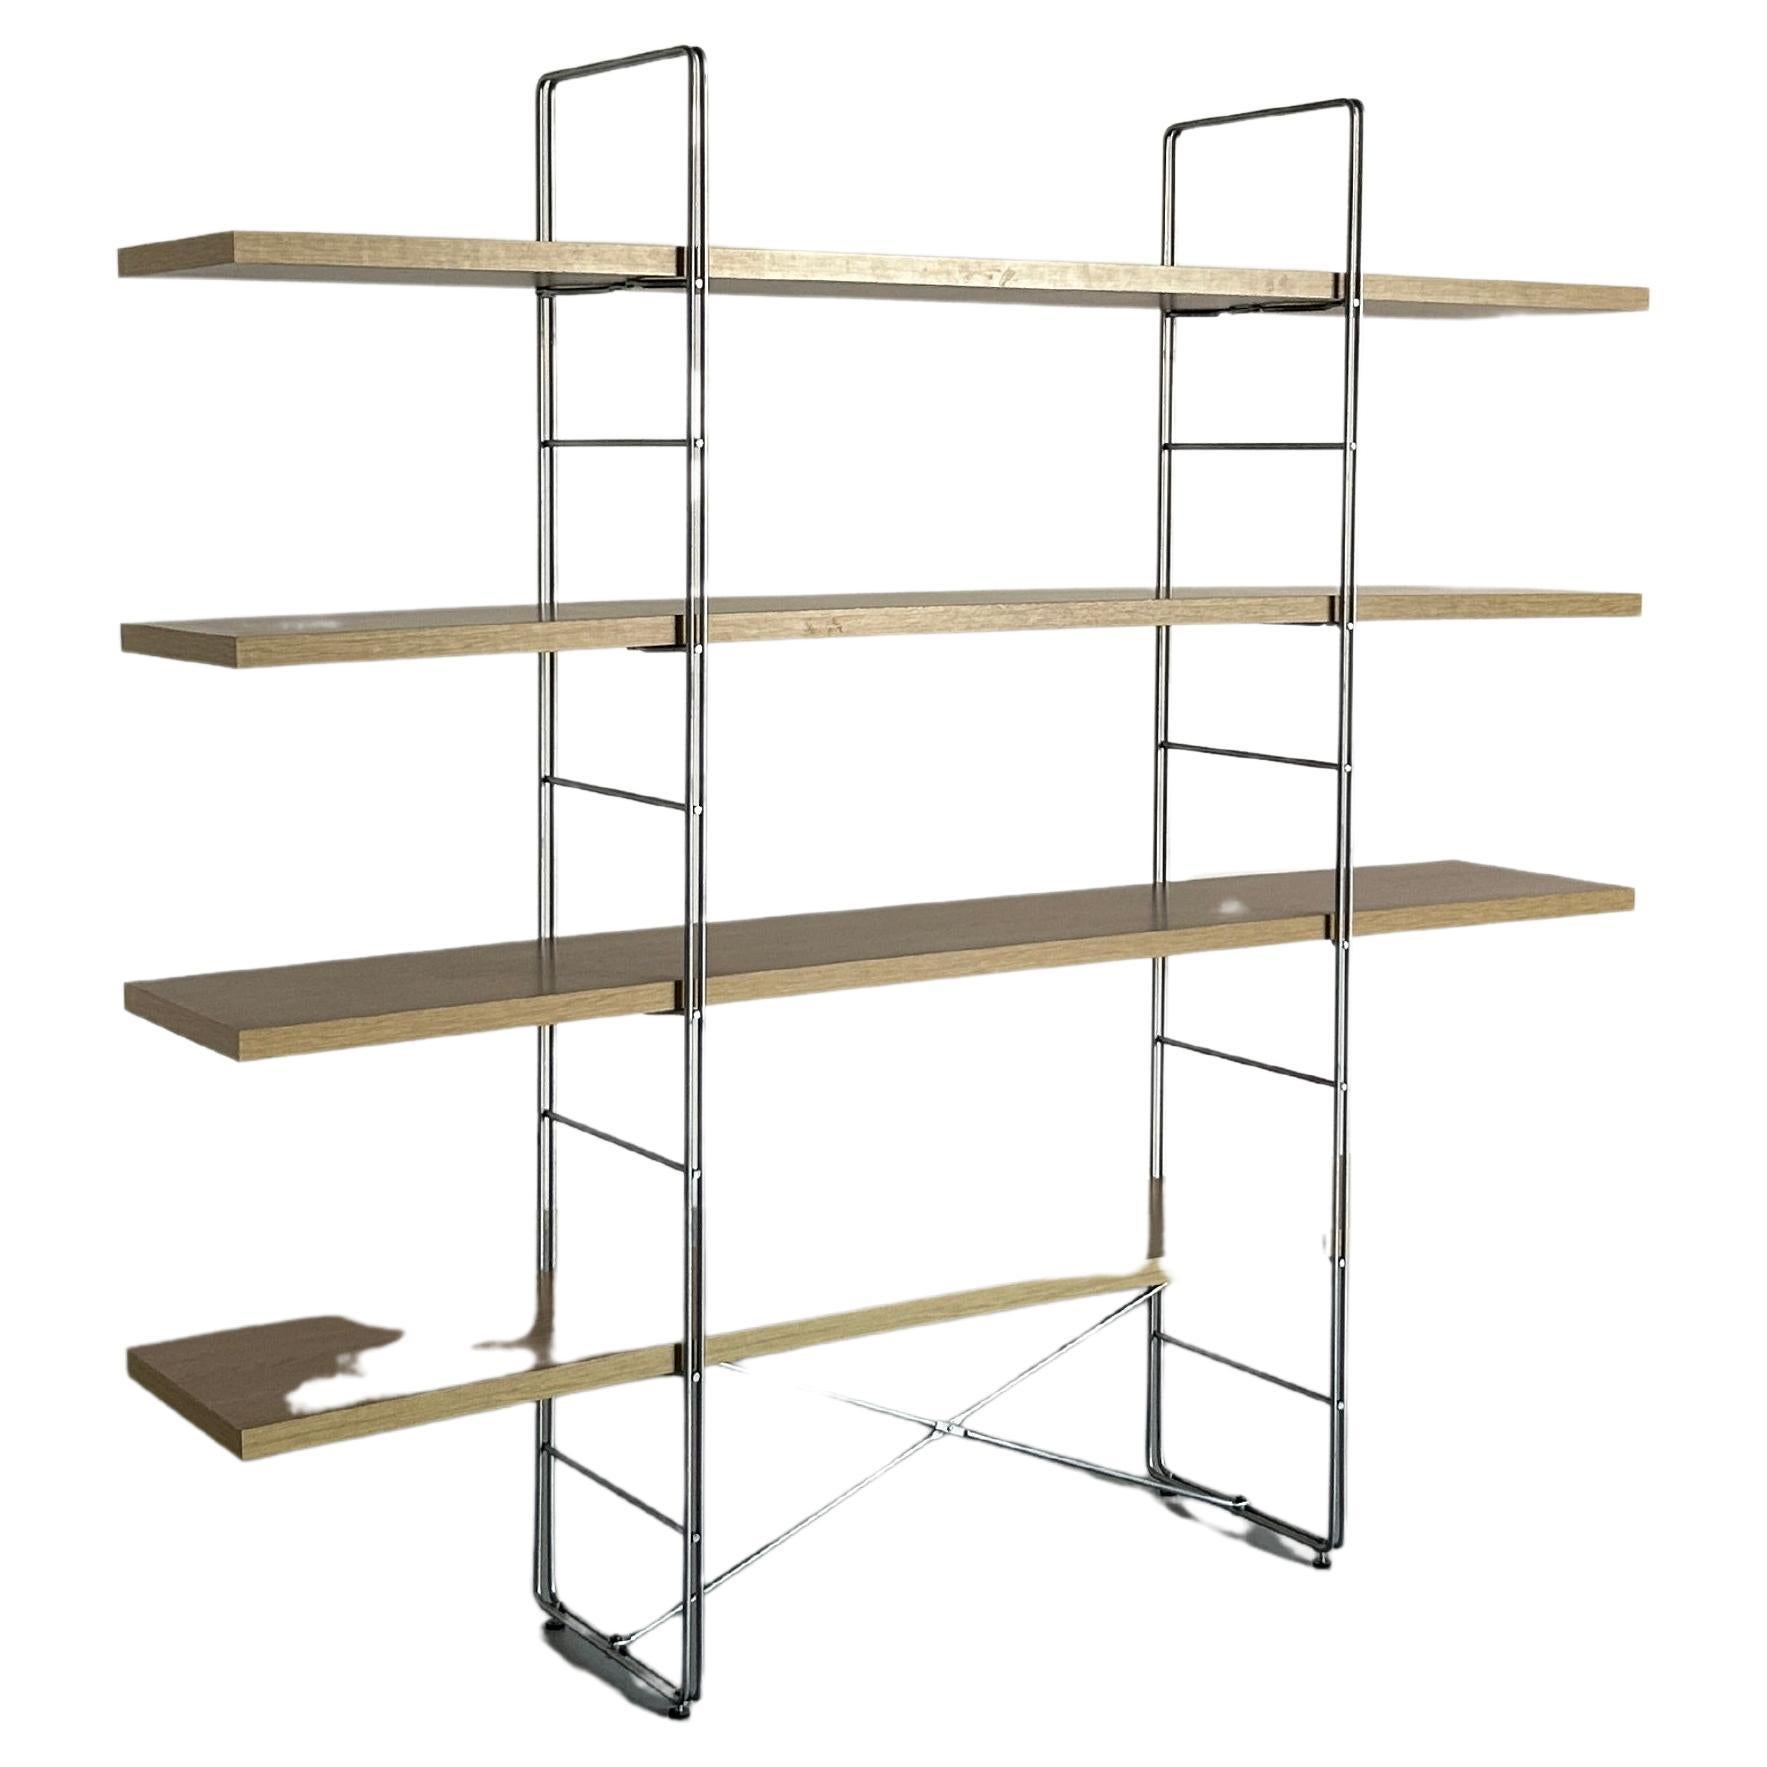 The famous Ikea shelf designed by Niels Gammelgaard in the 1980s, first introduced as the 'Moment' shelf, and later changing its name to 'Enetri' and 'Guide'.

One of the most searched for vintage Ikea designs, this particular piece was produced in